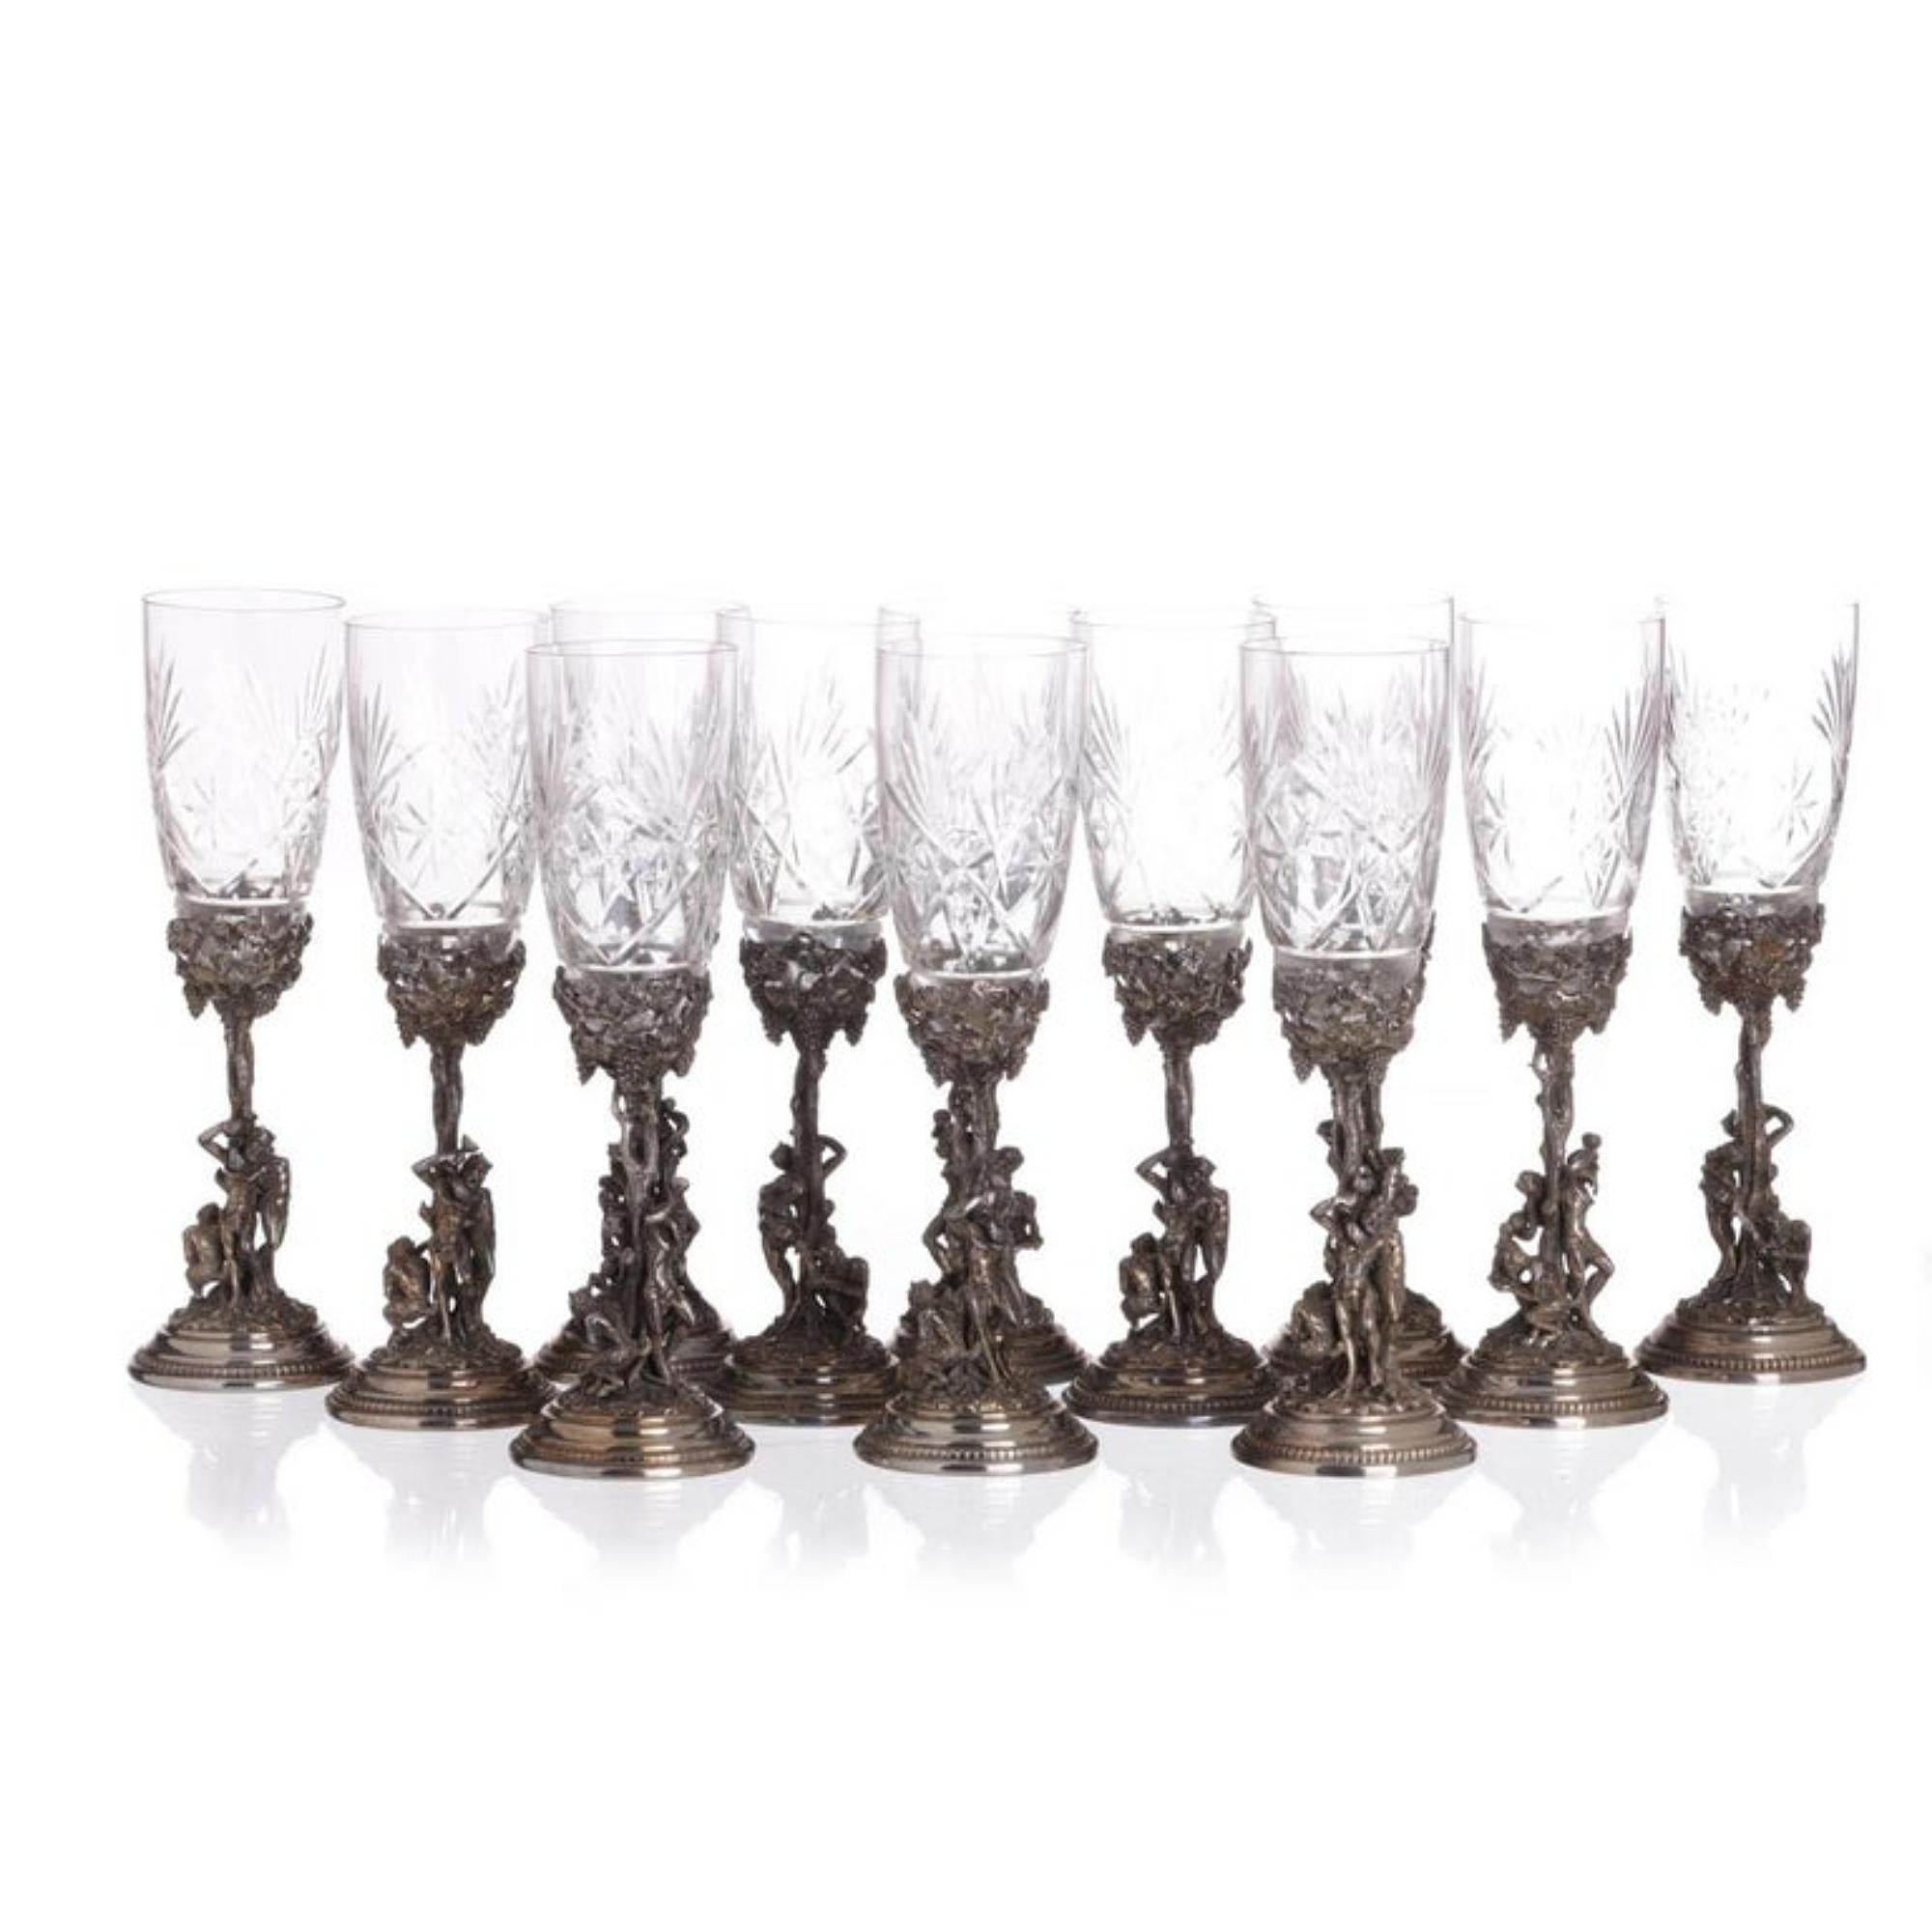 12 Italian cups serving
of the 20th century in cut crystal, with base and base in silver metal, relieved decoration alluding to the God Bacchus.
Brand name on the base
Measure: Height: 23 cm
Very good condition.

